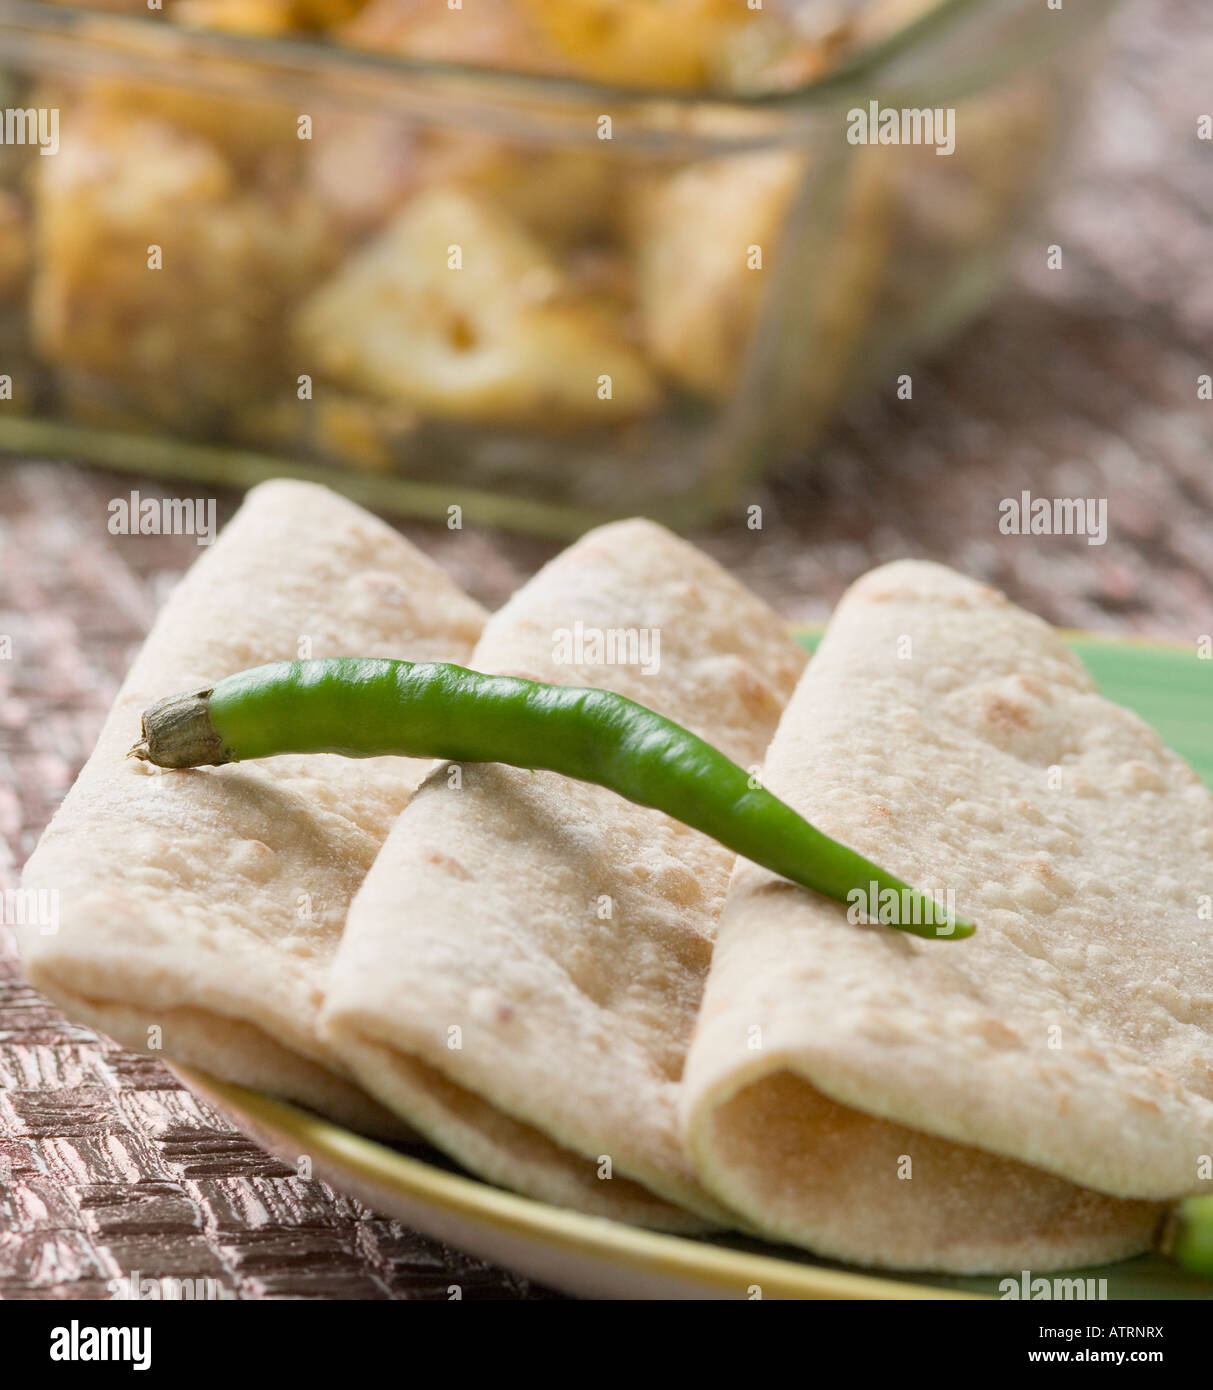 Close-up of chapattis in a plate Stock Photo